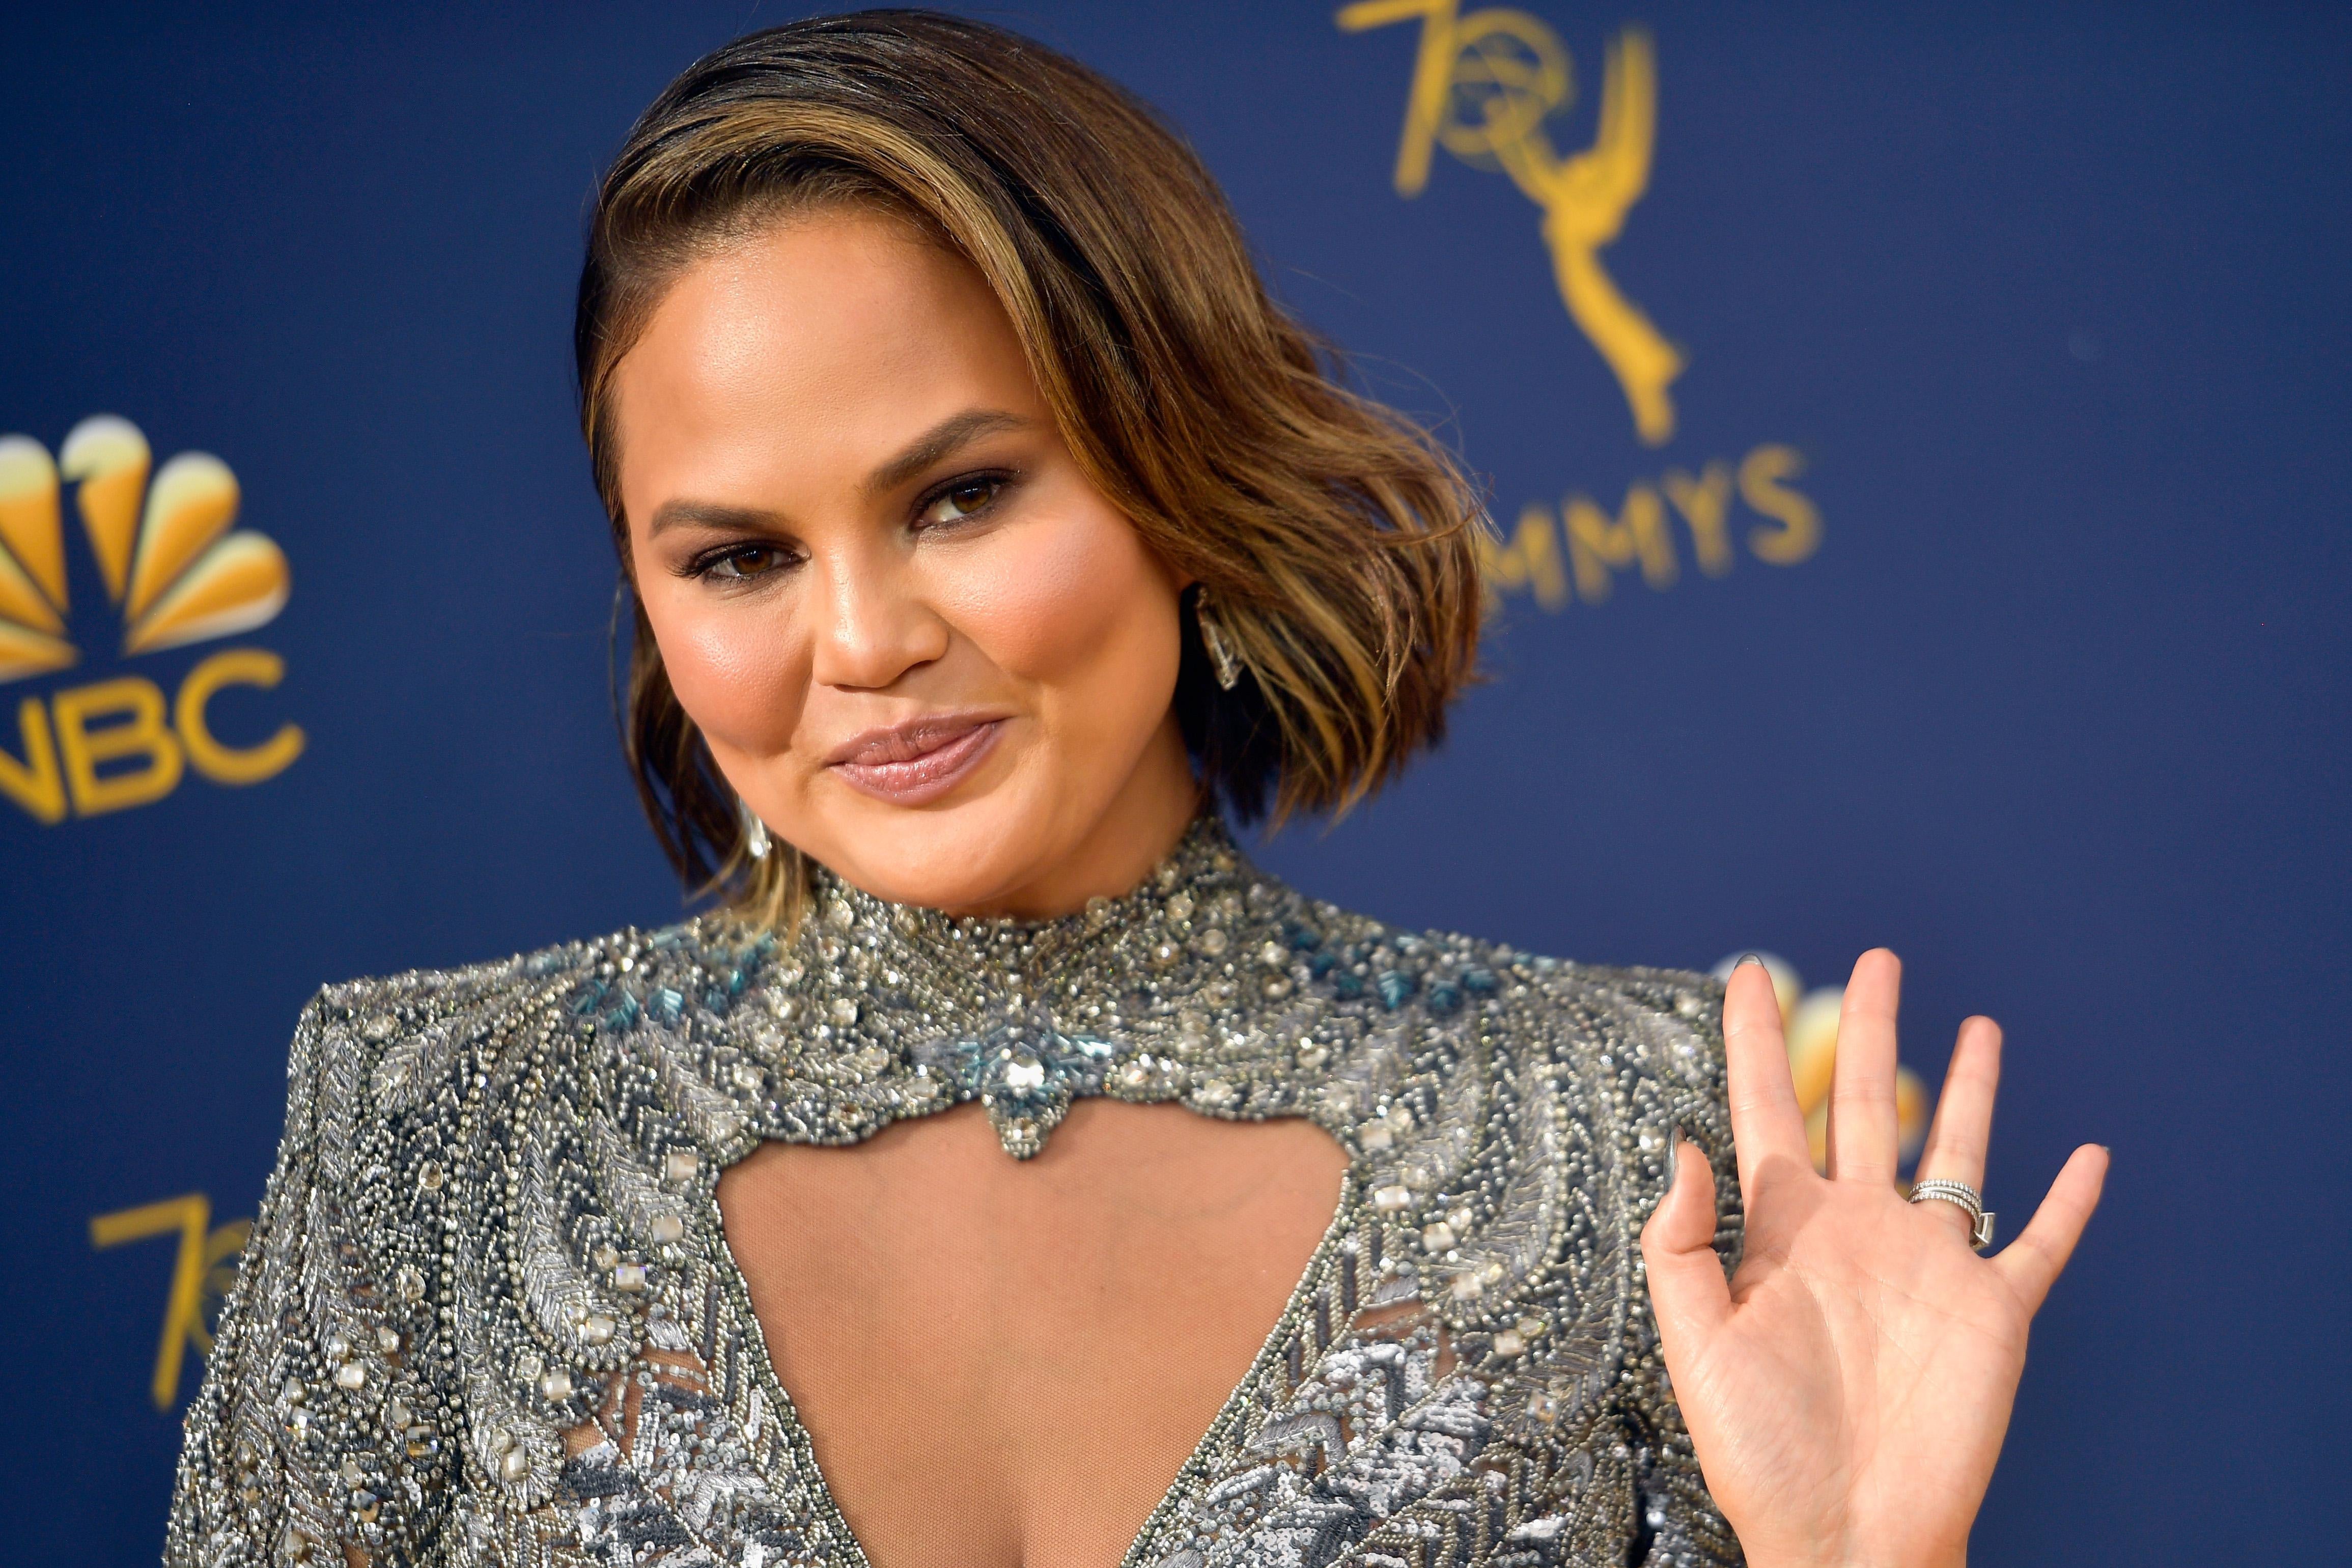 Chrissy Teigen waves at the camera, wearing a silver high-neck gown. 